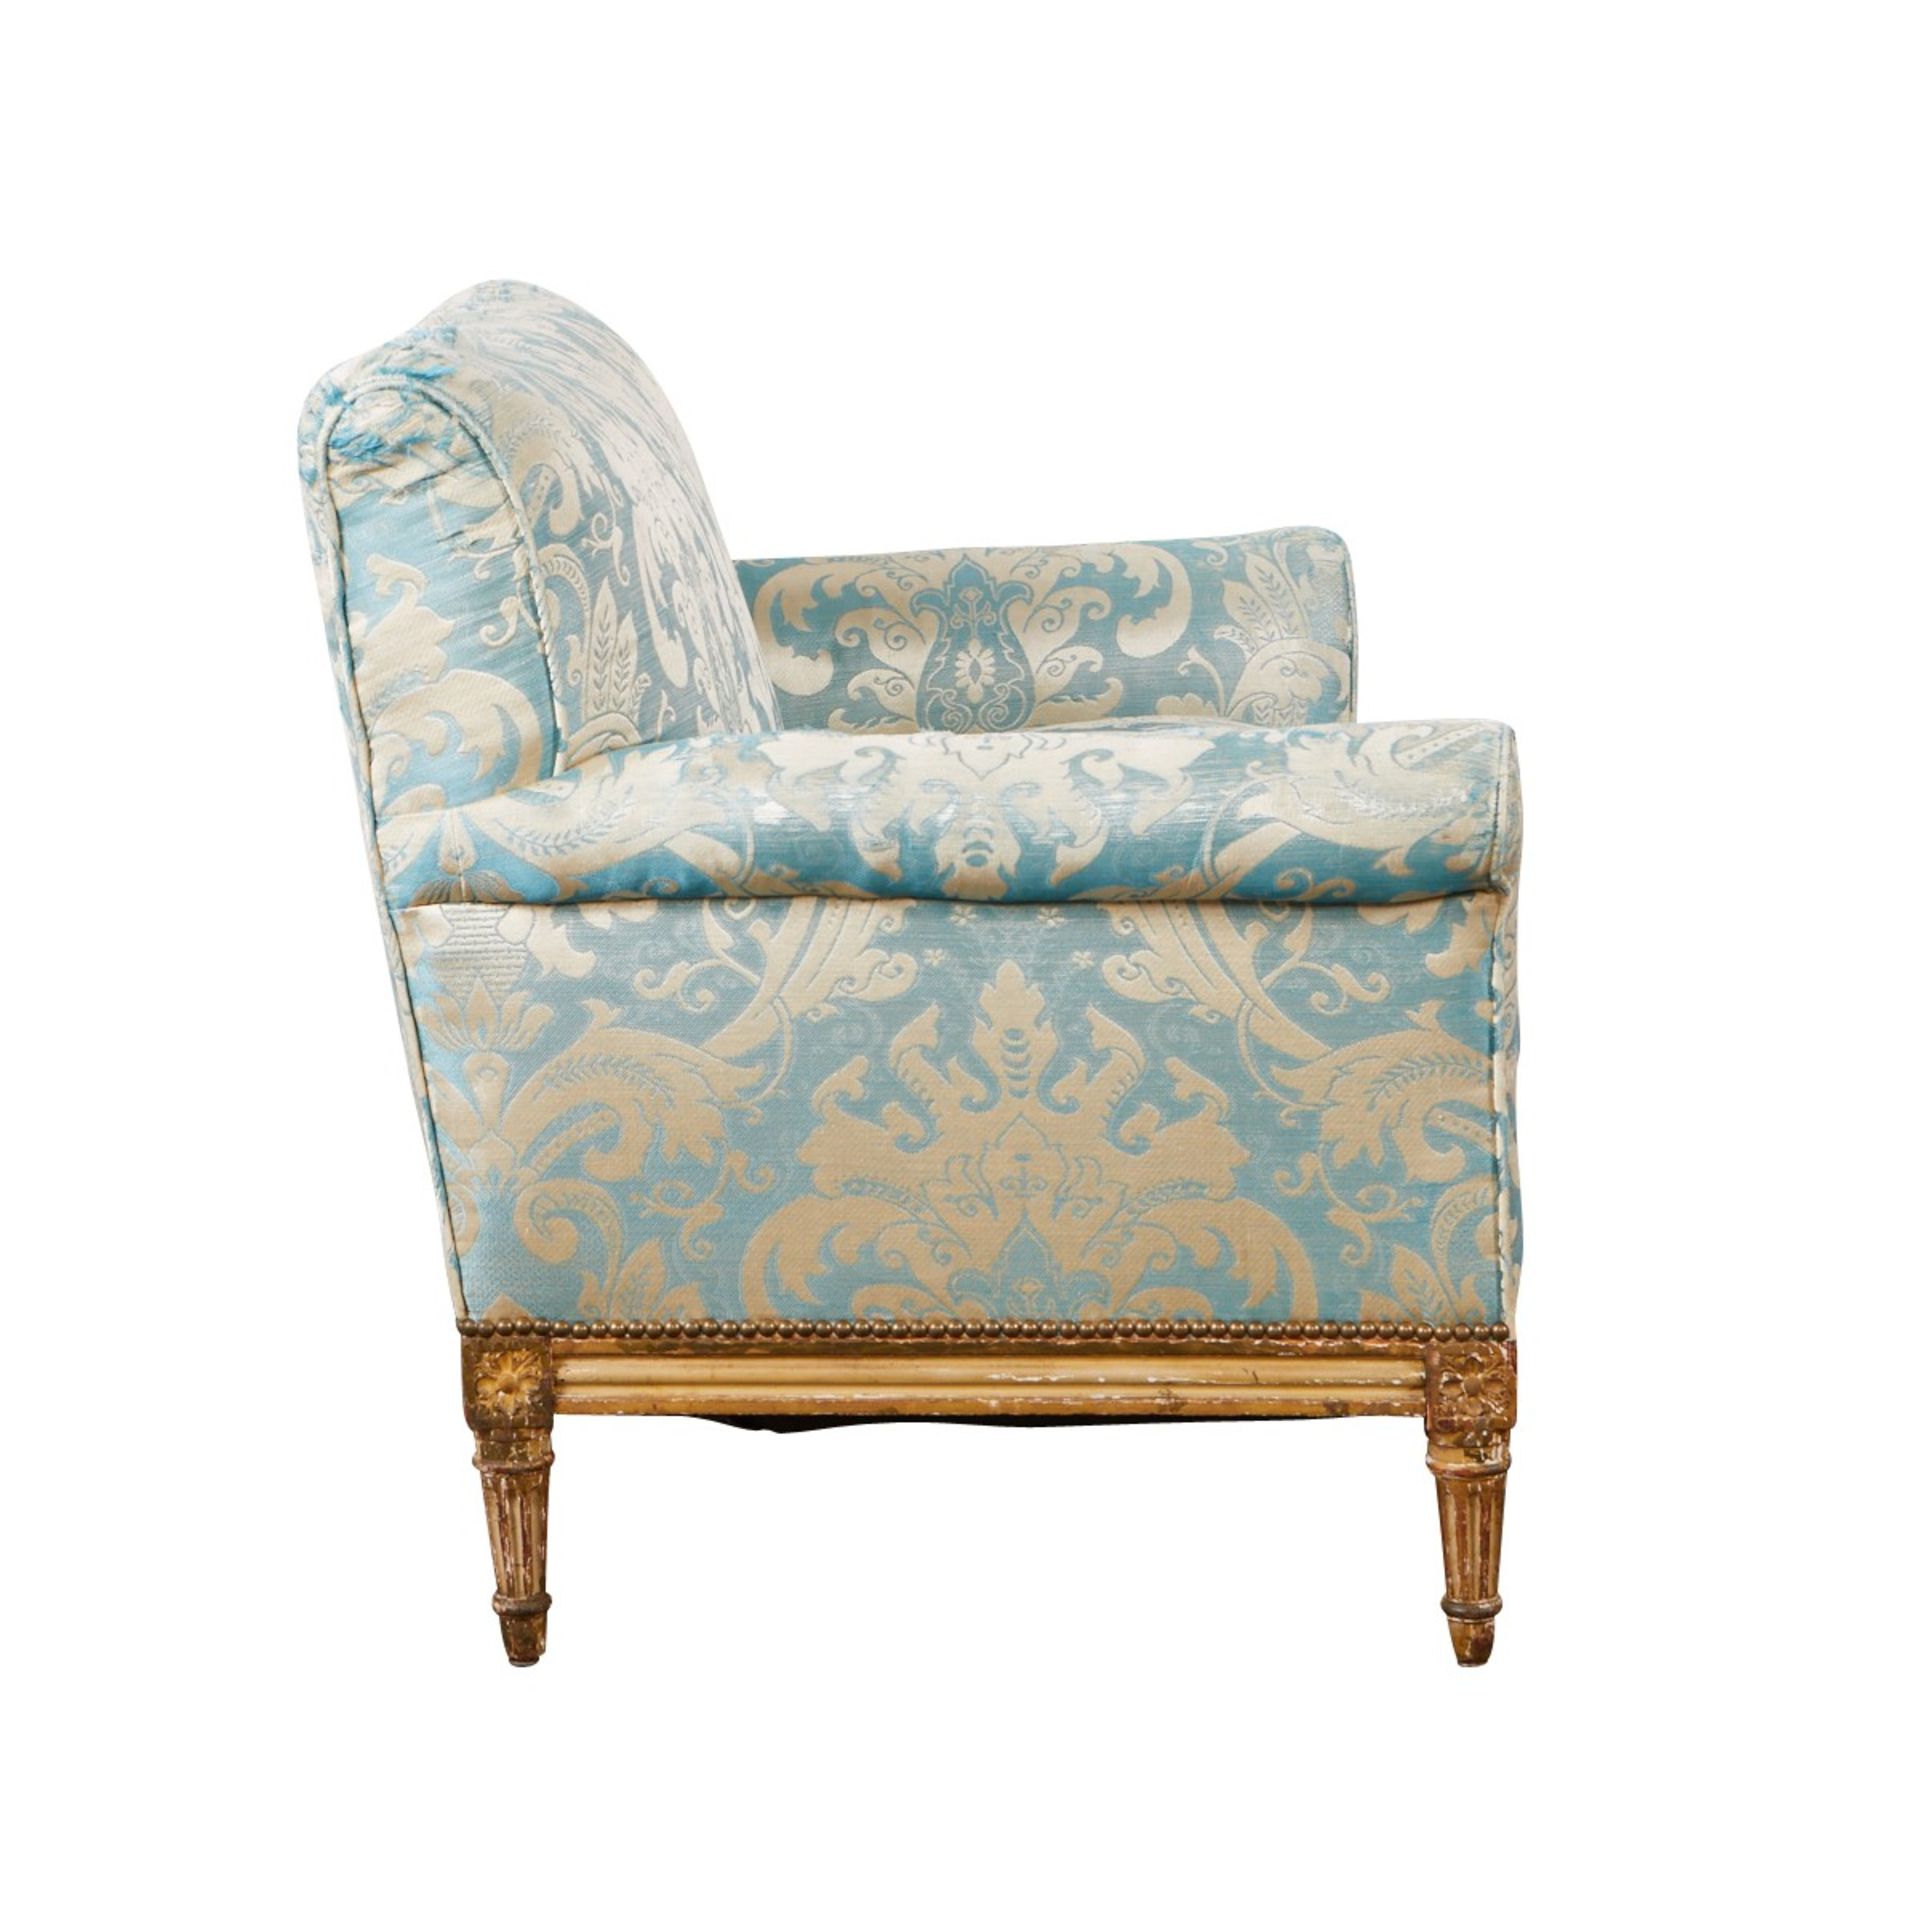 French Upholstered Giltwood Loveseat or Settee - Image 3 of 13